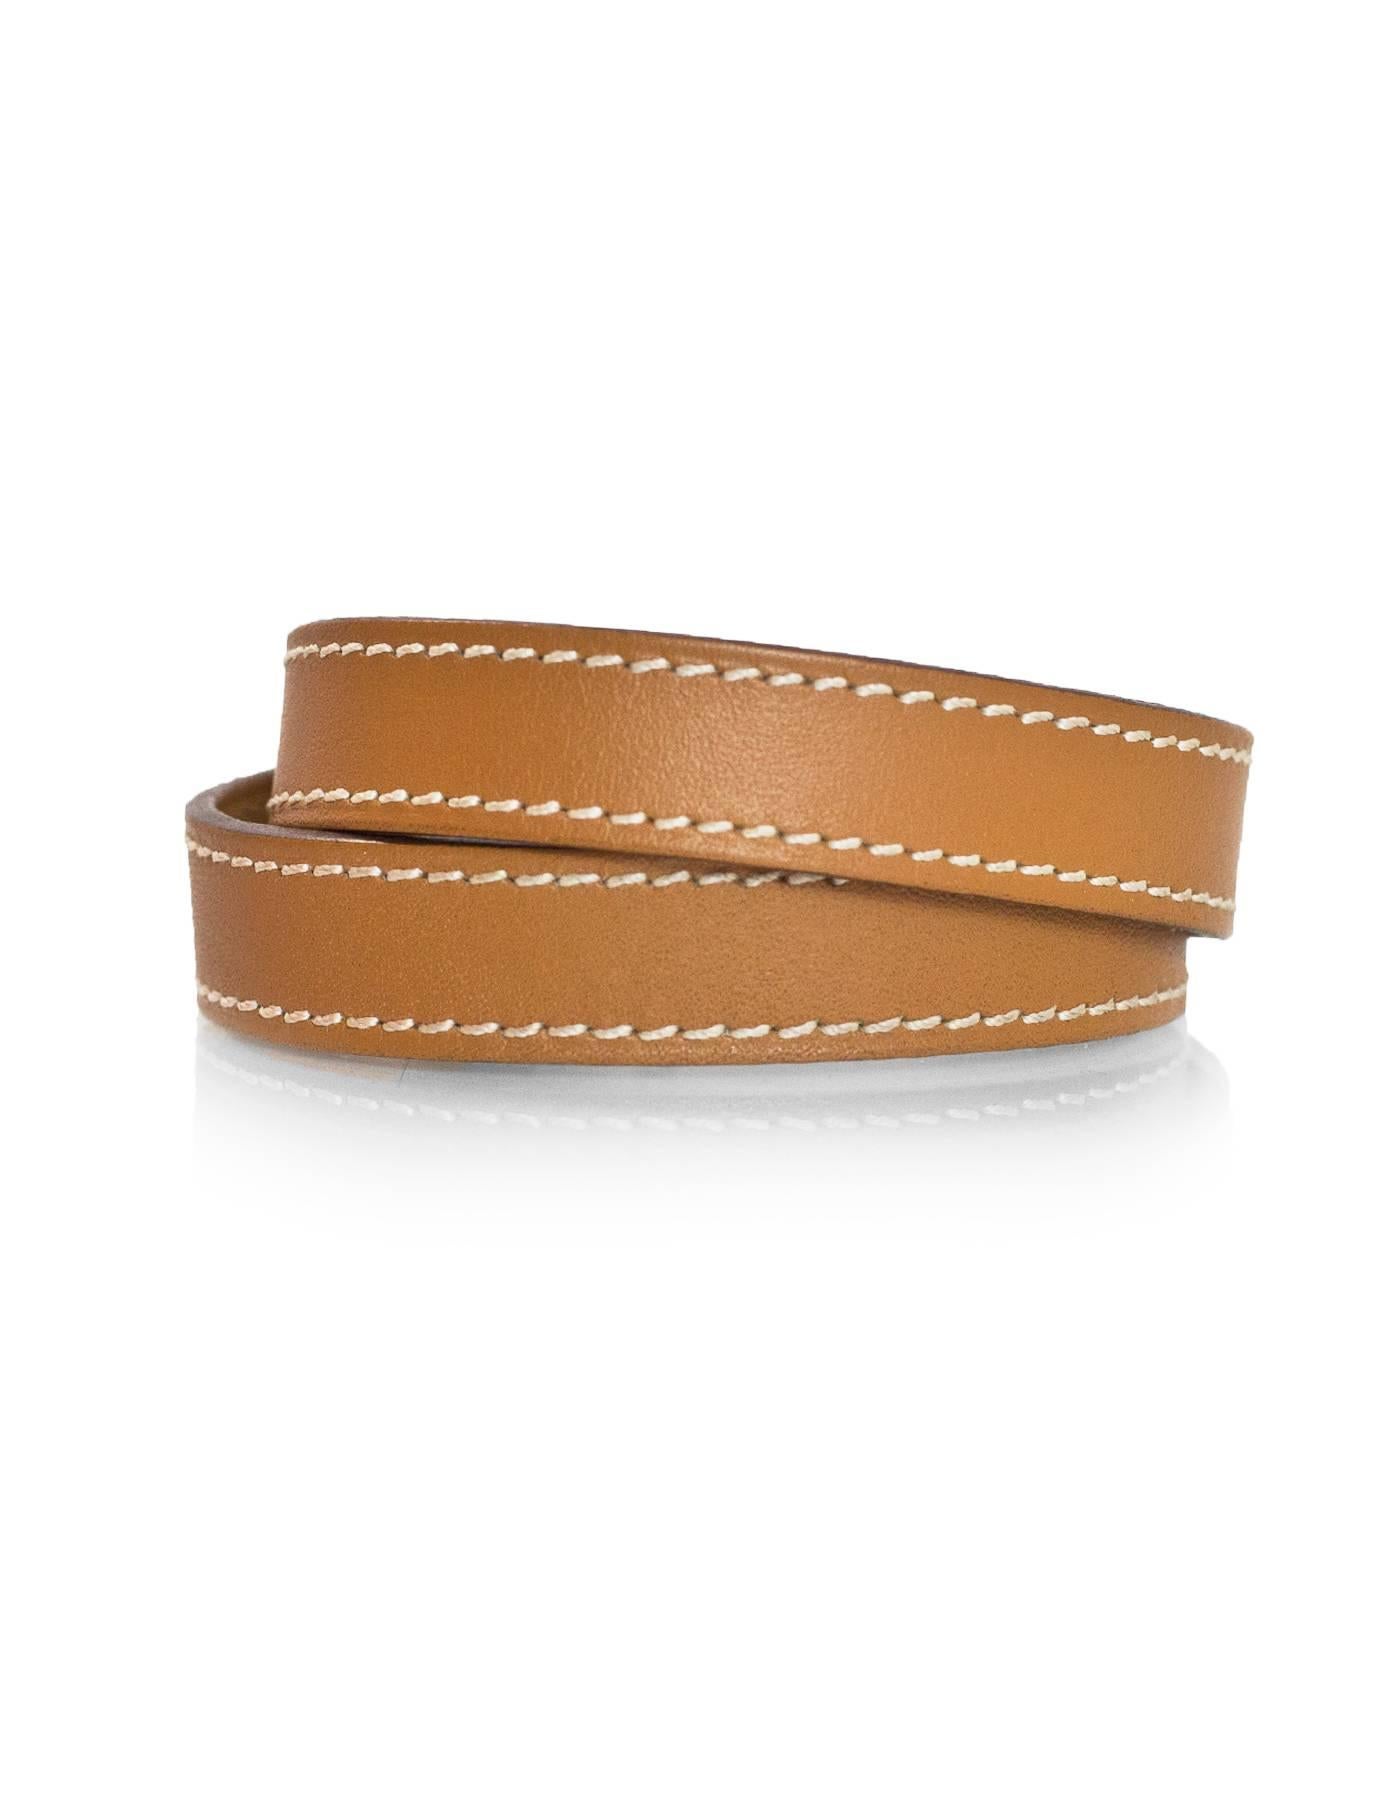 Hermes Tan Leather Kelly Double Tour Bracelet with Box 1